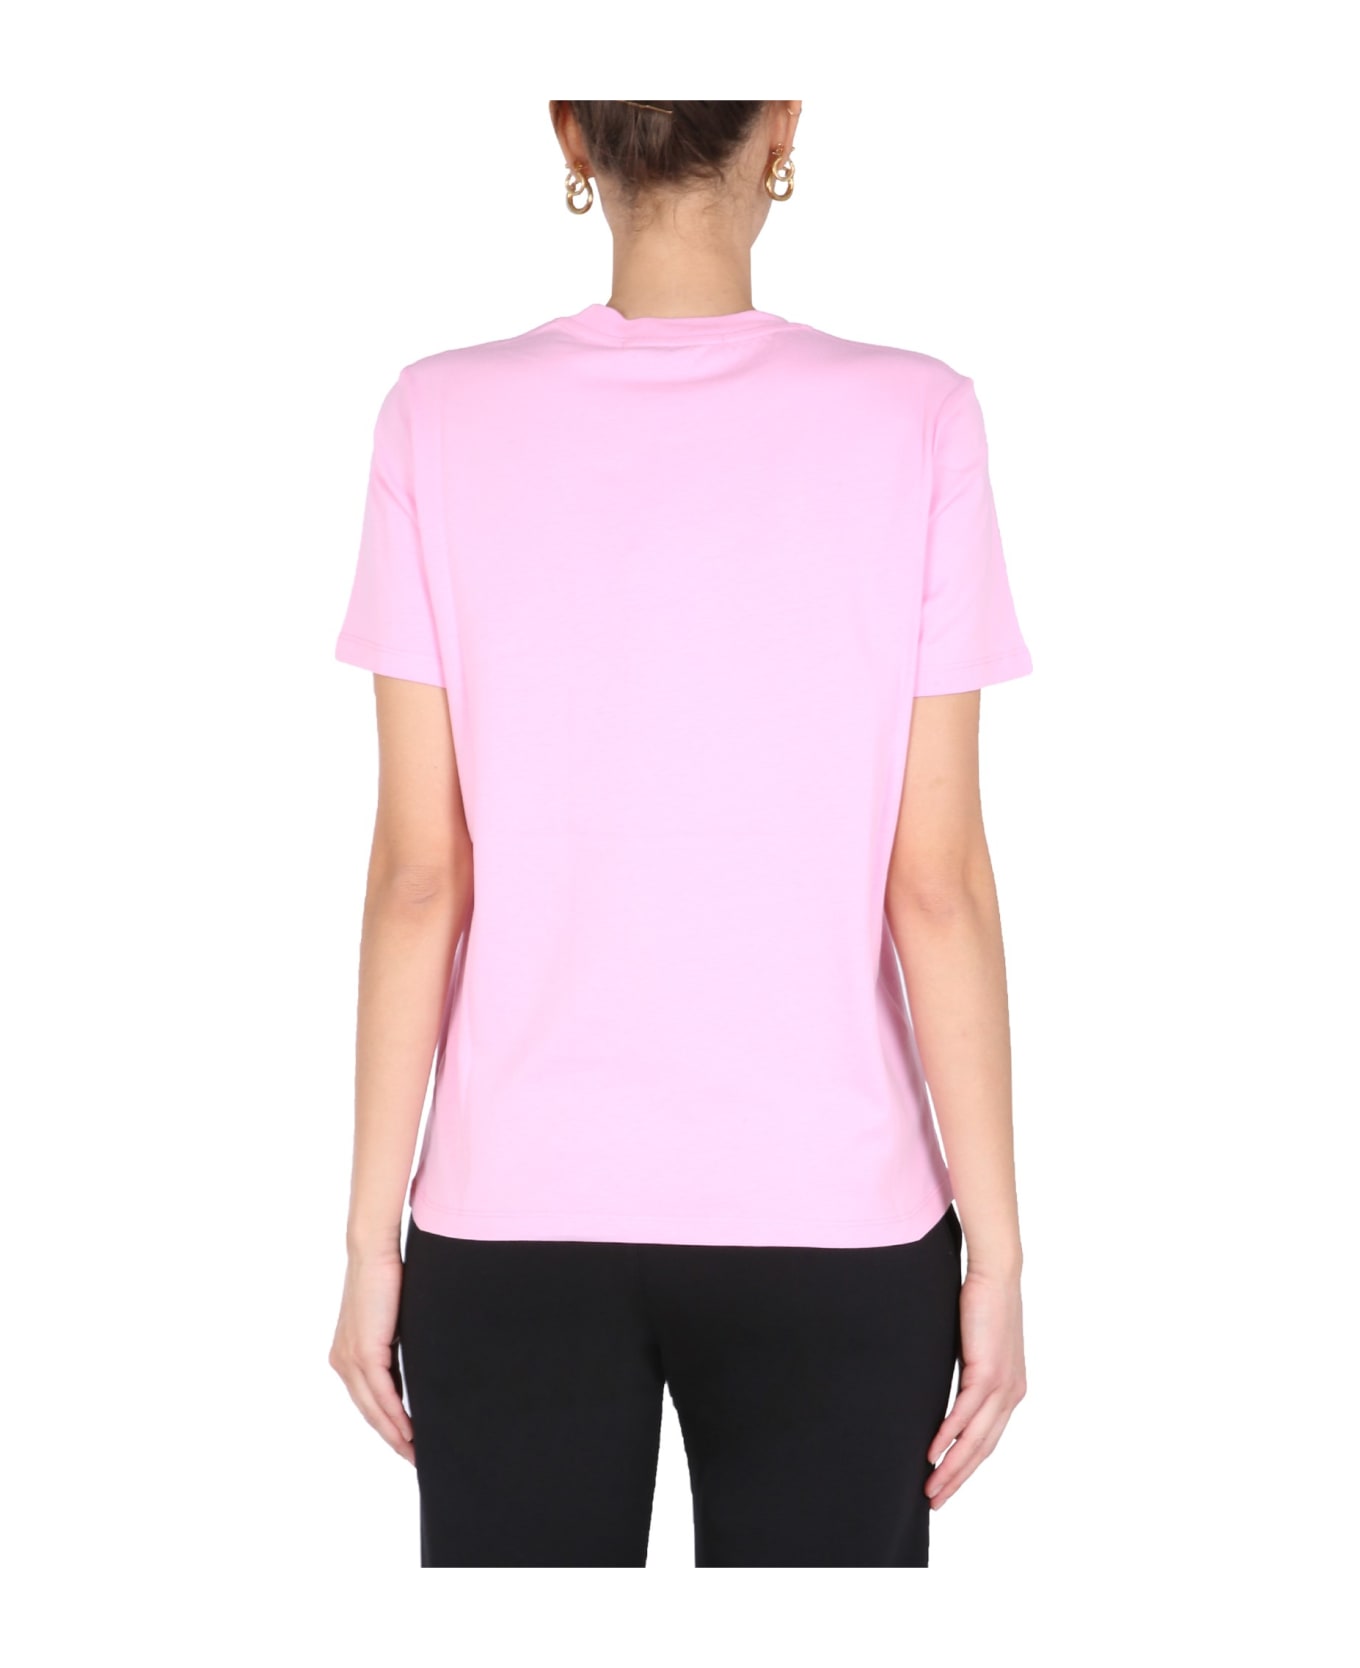 MSGM T-shirt With Logo - Pink